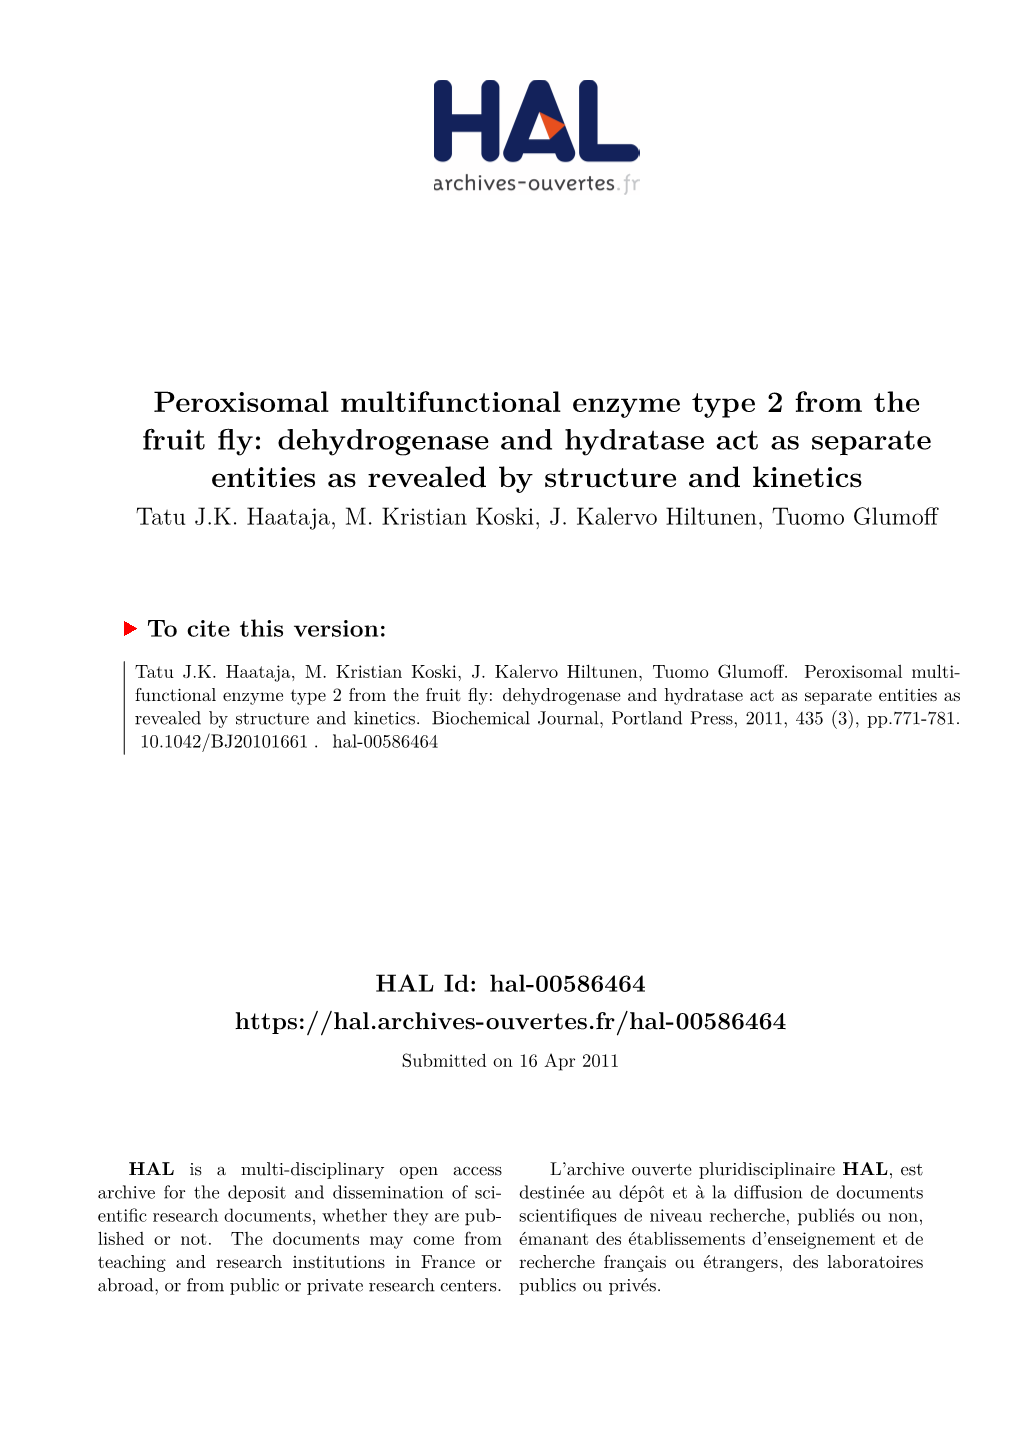 Peroxisomal Multifunctional Enzyme Type 2 from the Fruit Fly: Dehydrogenase and Hydratase Act As Separate Entities As Revealed by Structure and Kinetics Tatu J.K